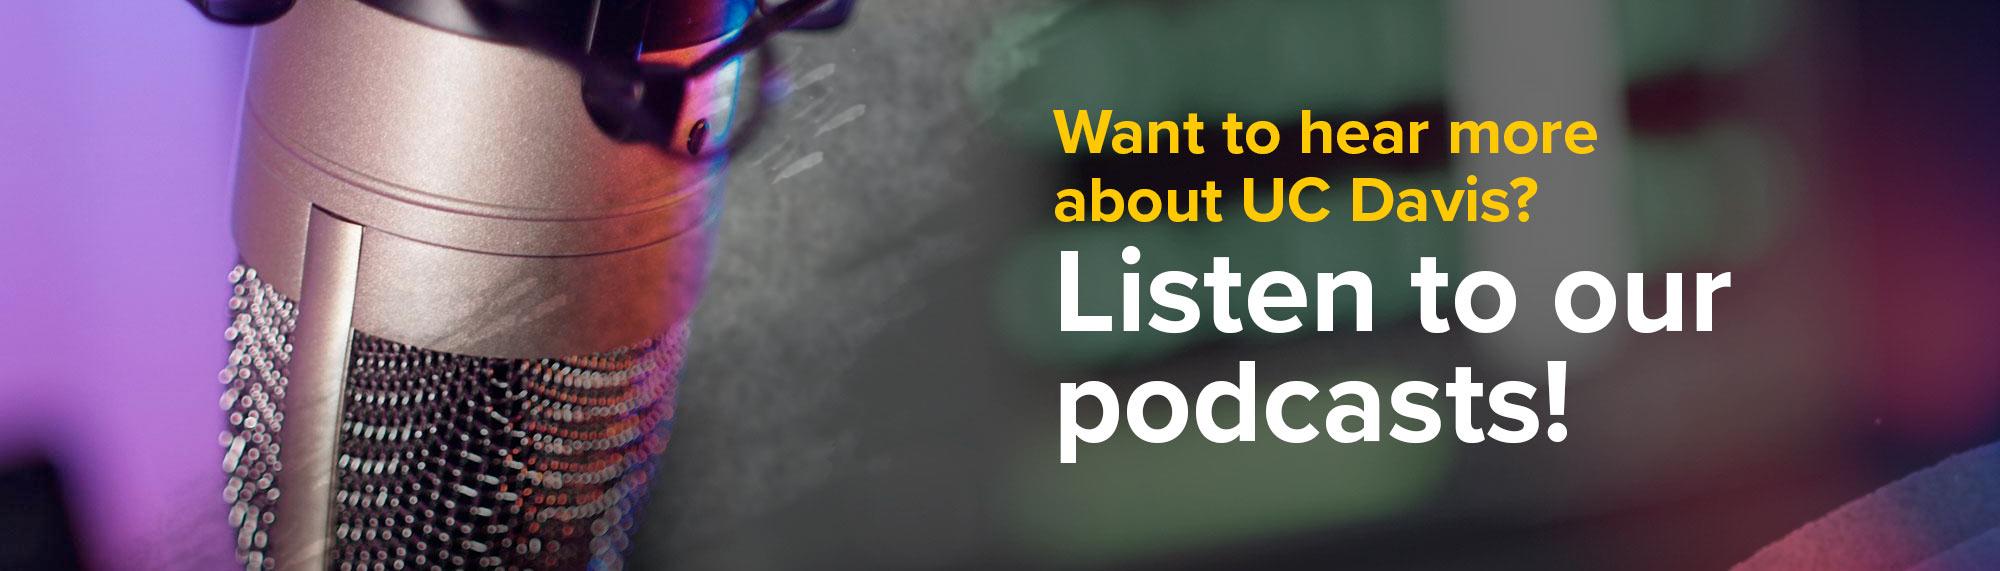 Want to hear more about UC Davis? Listen to our podcasts!